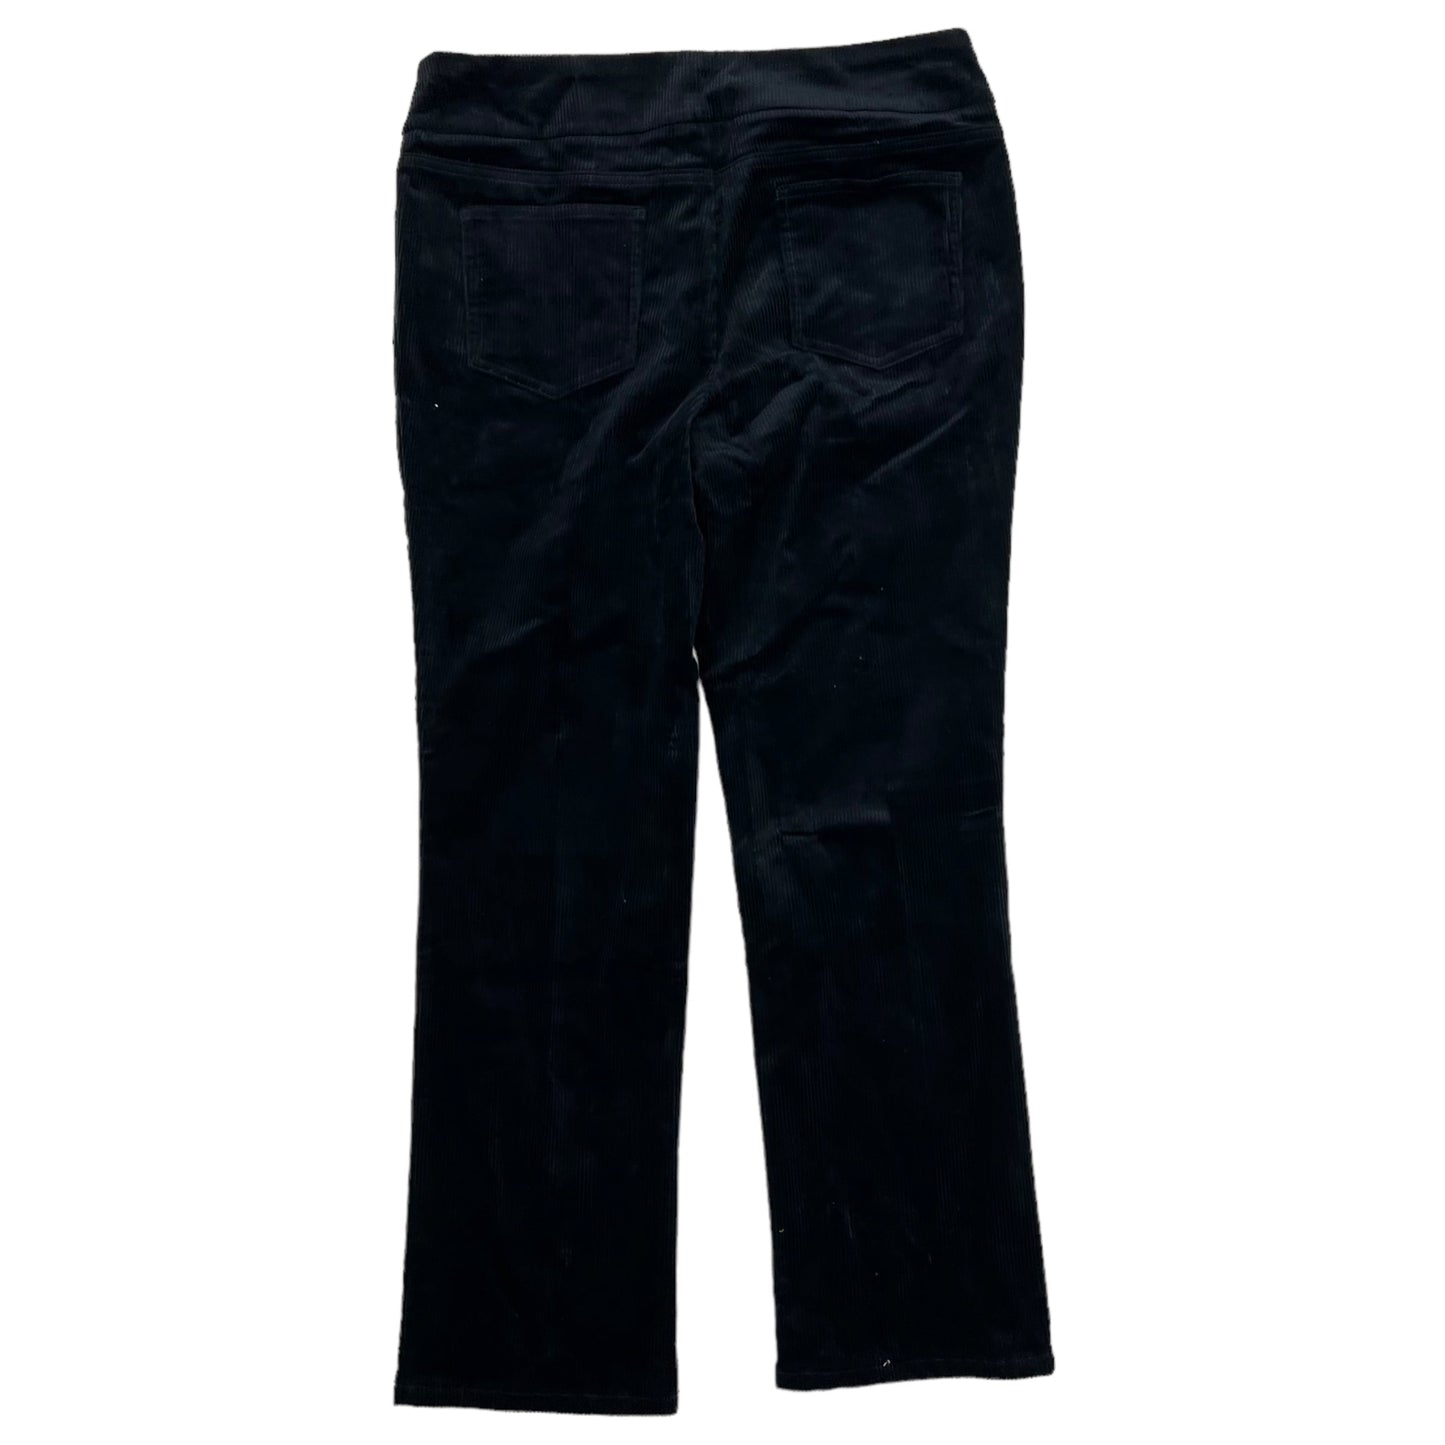 Pants Corduroy By Denim And Company  Size: 16